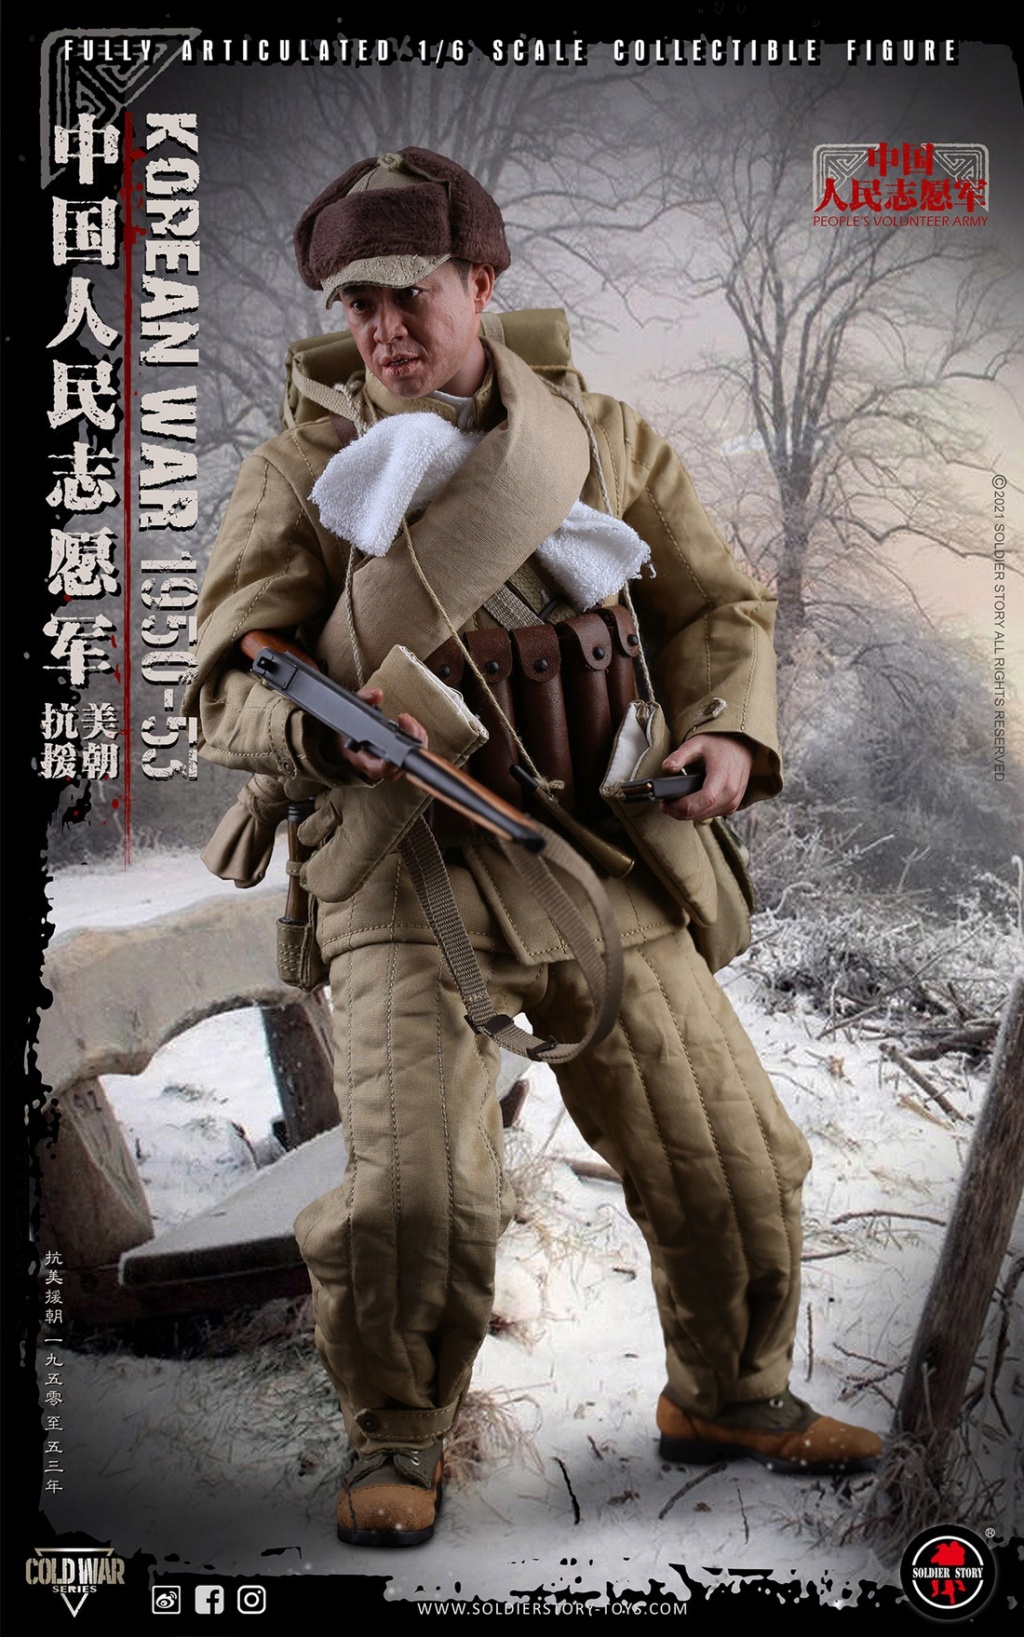 Soldierstory - NEW PRODUCT: SOLDIER STORY: 1/6 Chinese People’s Volunteers 1950-53 Collectible Action Figure (#SS-124) B635a810